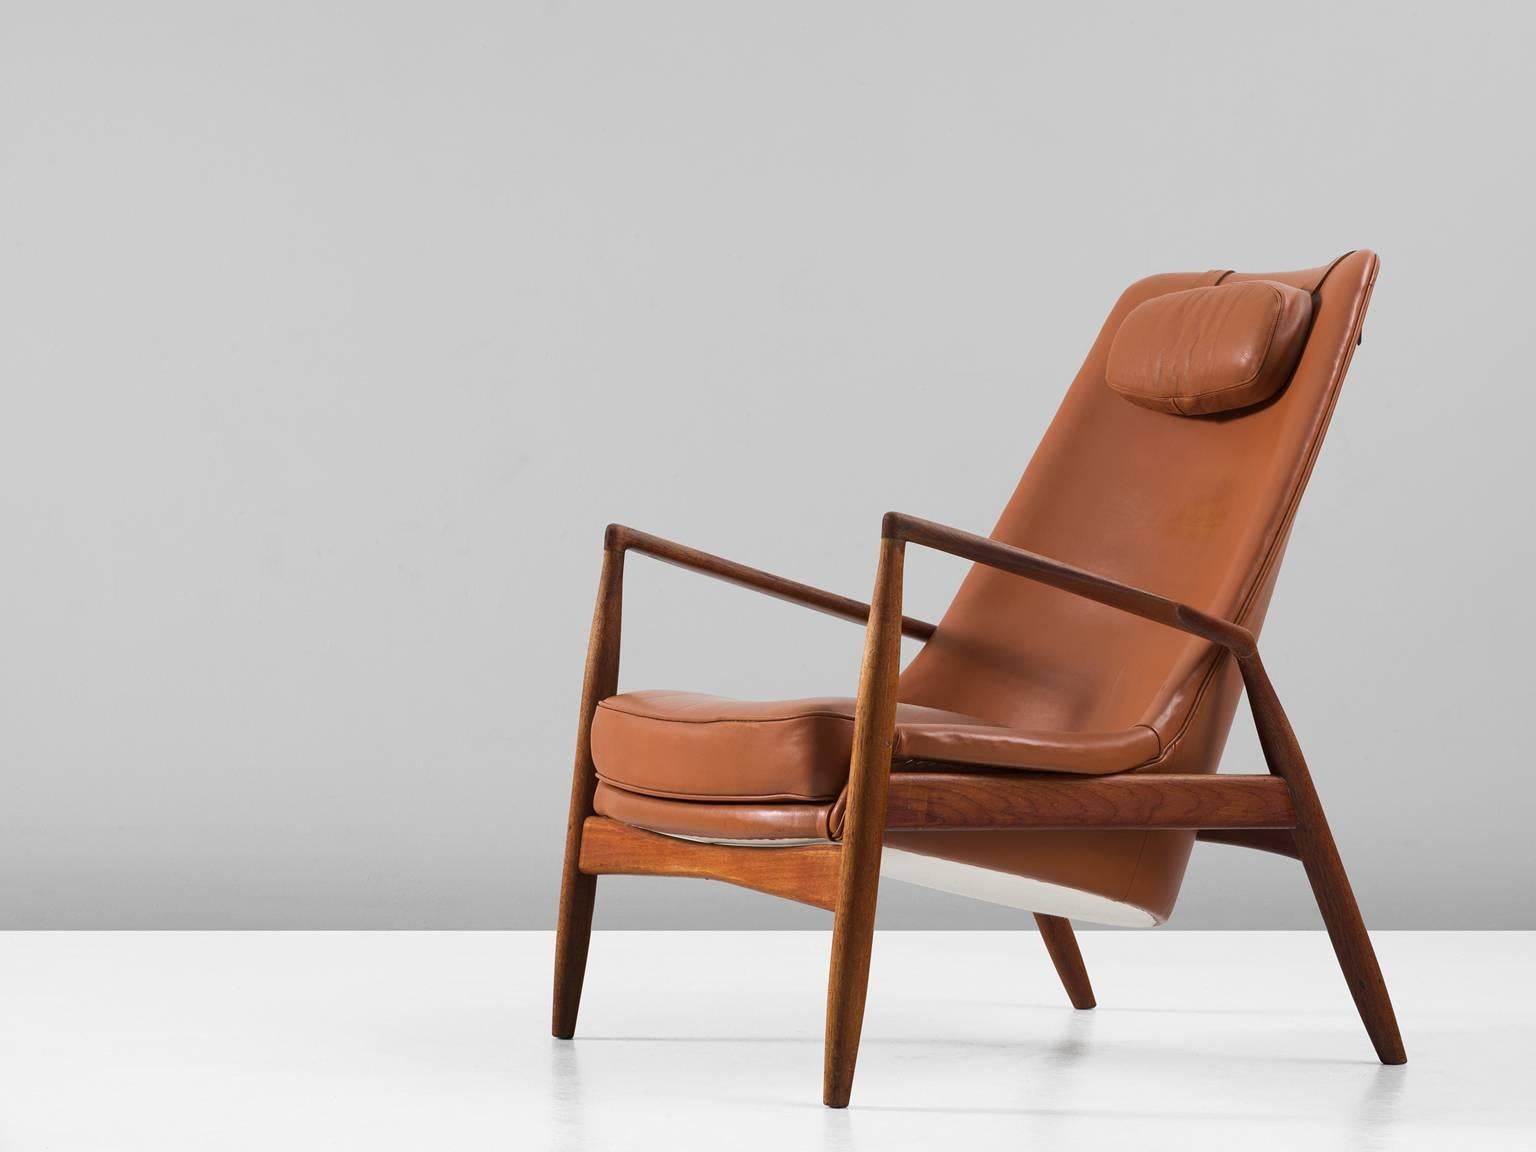 Lounge chair model 503-799 'Seal', in teak and leather by Ib Kofod-Larsen, Denmark, circa 1956.

High back version of the iconic Sålen lounge chair. The well-crafted frame of this chair is made in solid teak. It shows very nice details and wood